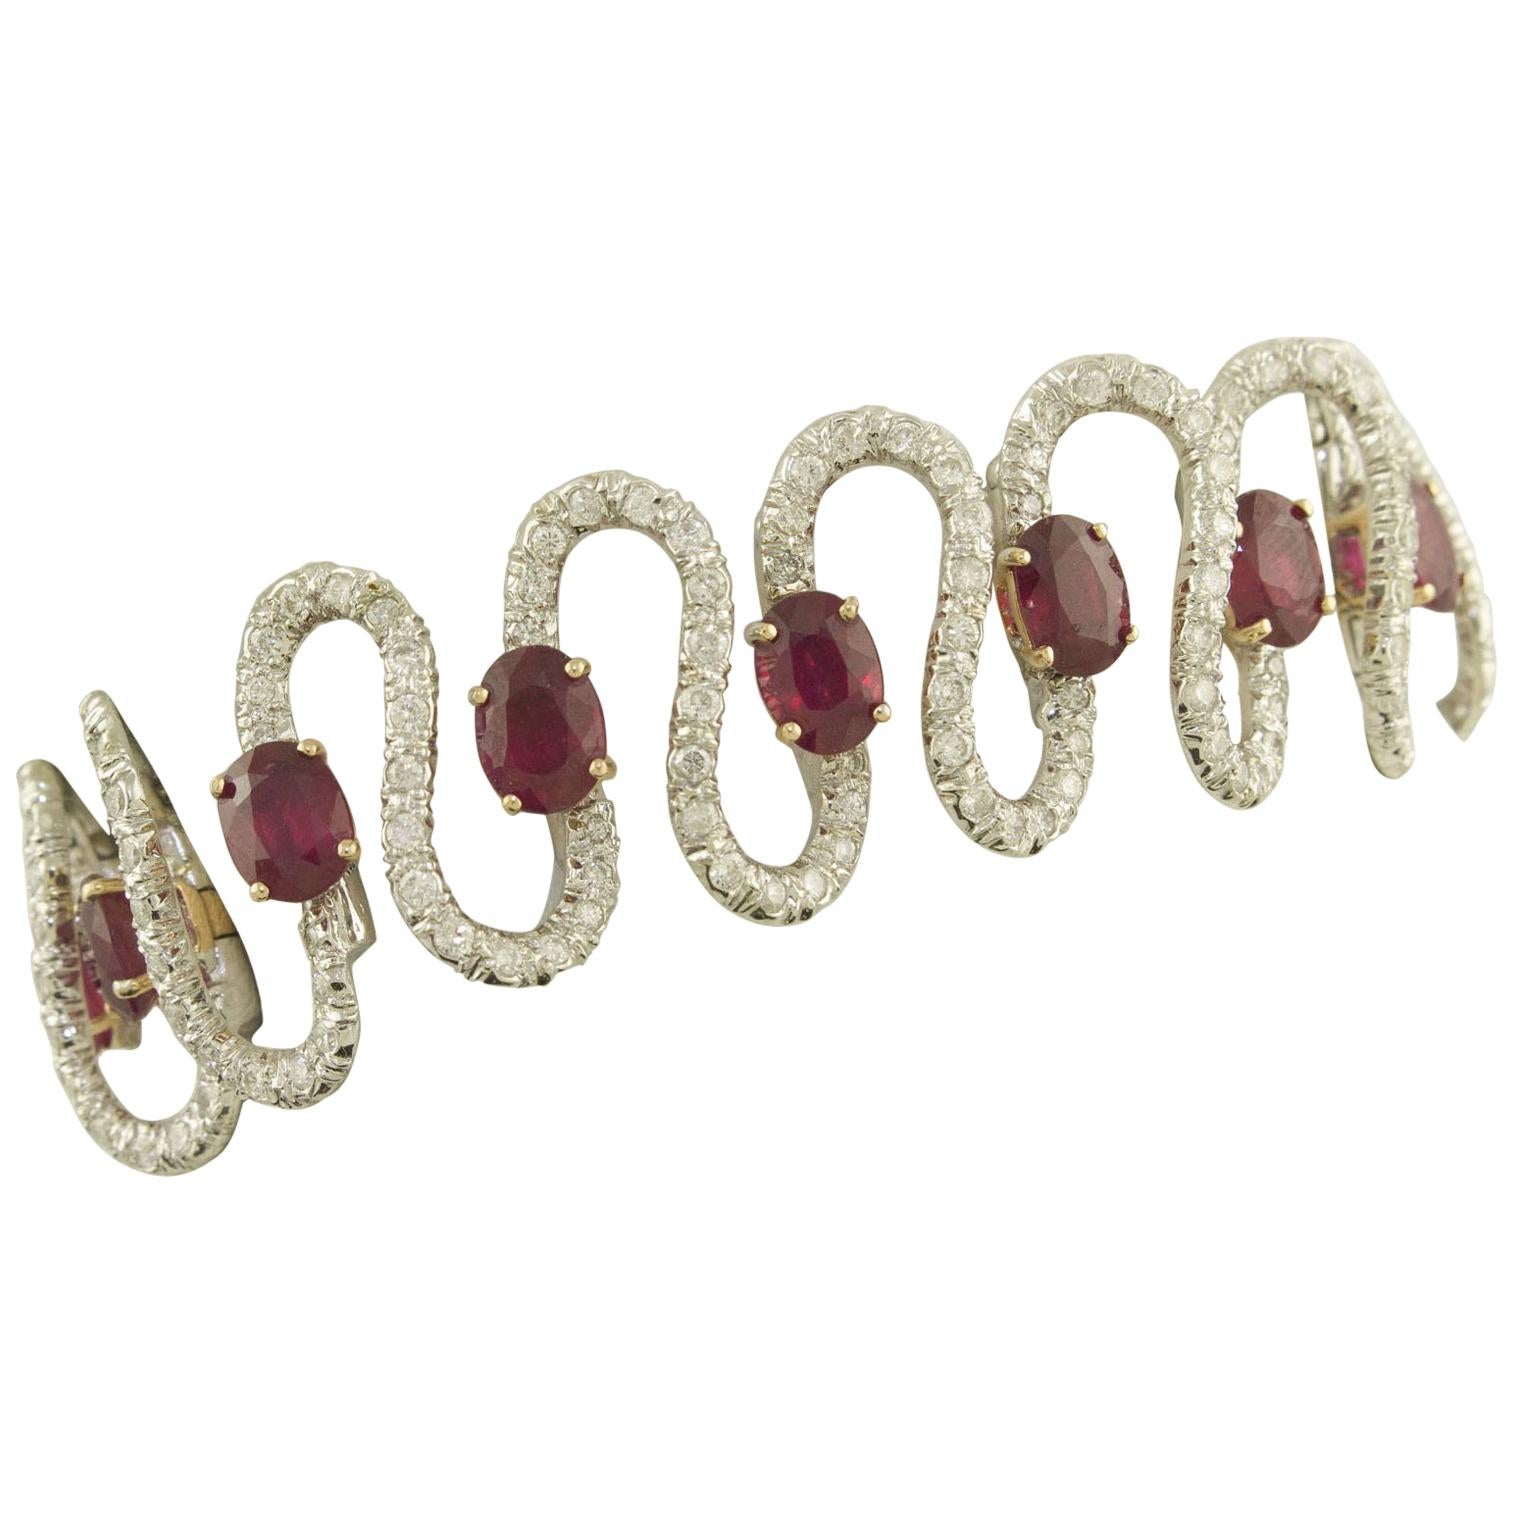 Rubies White Diamonds White and Rose Gold Waves Bracelet For Sale